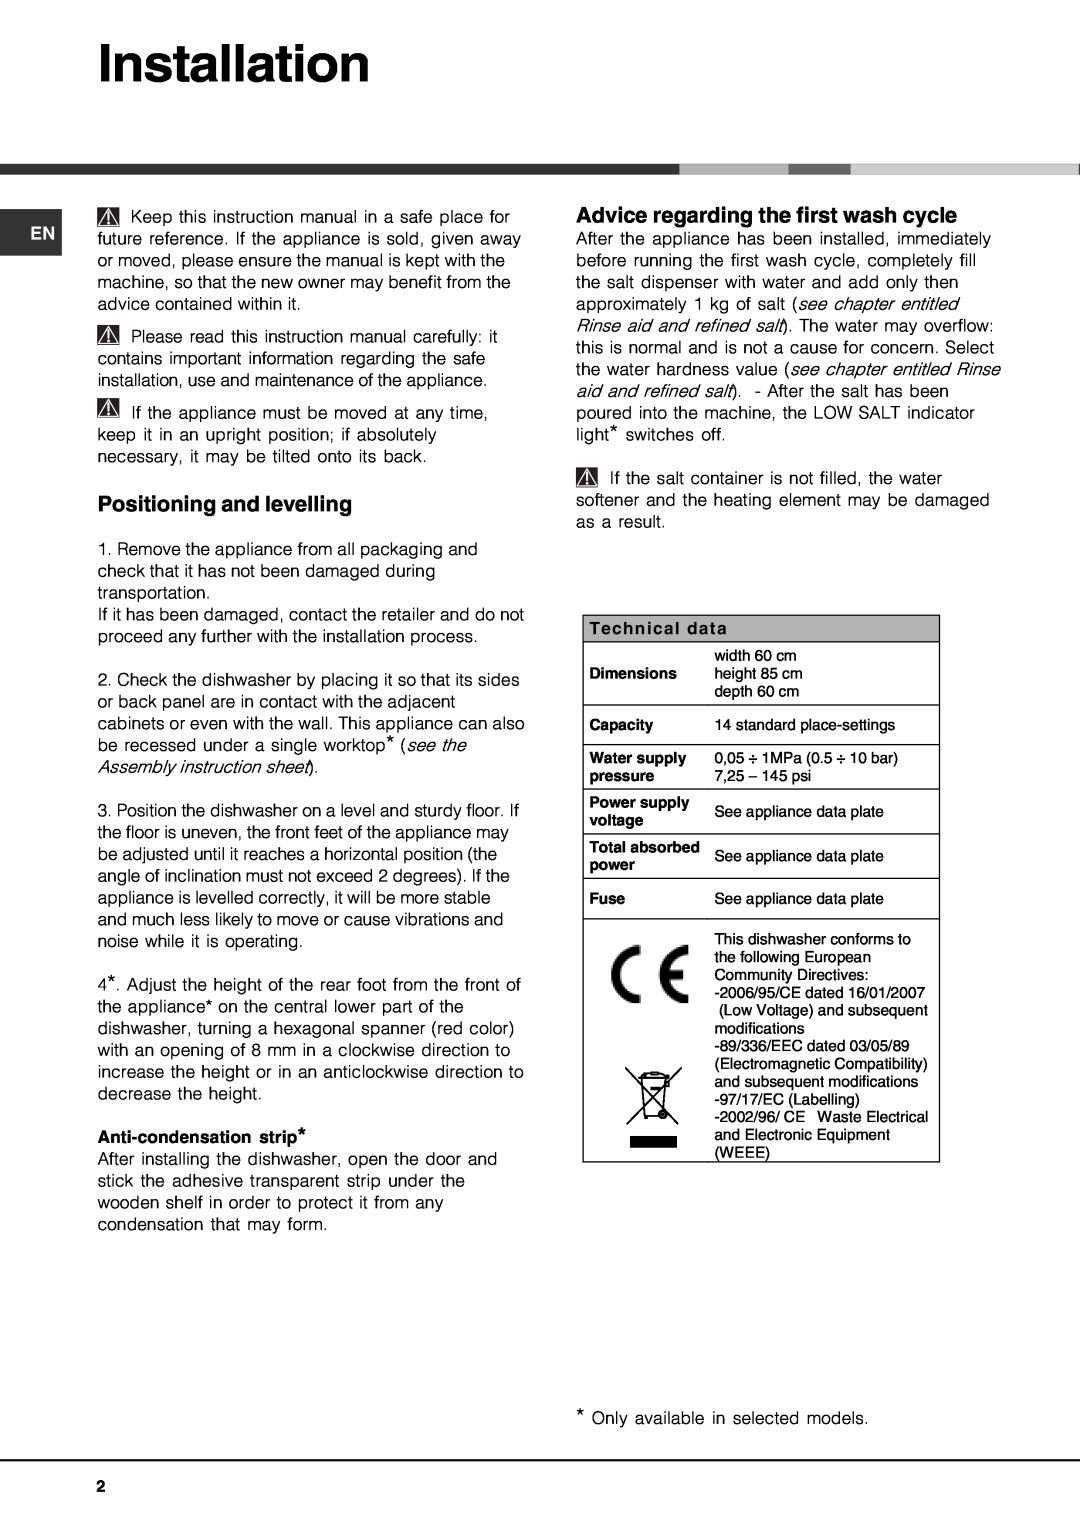 Hotpoint FDF 784 manual Installation, Positioning and levelling, Advice regarding the first wash cycle, Technical data 